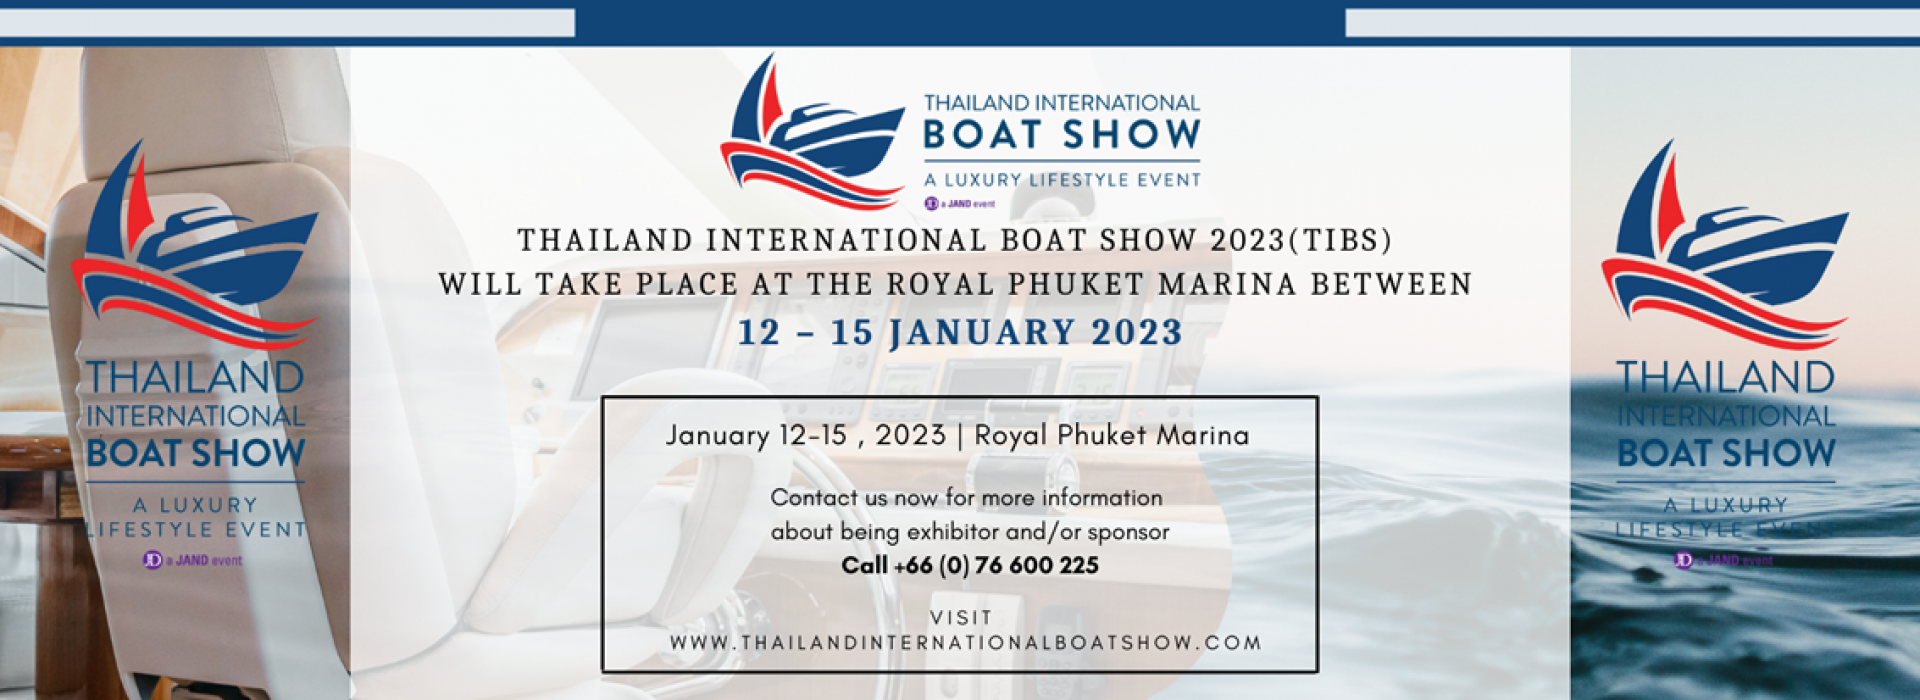 The Thailand International Boat Show 2023 a luxury lifestyle events